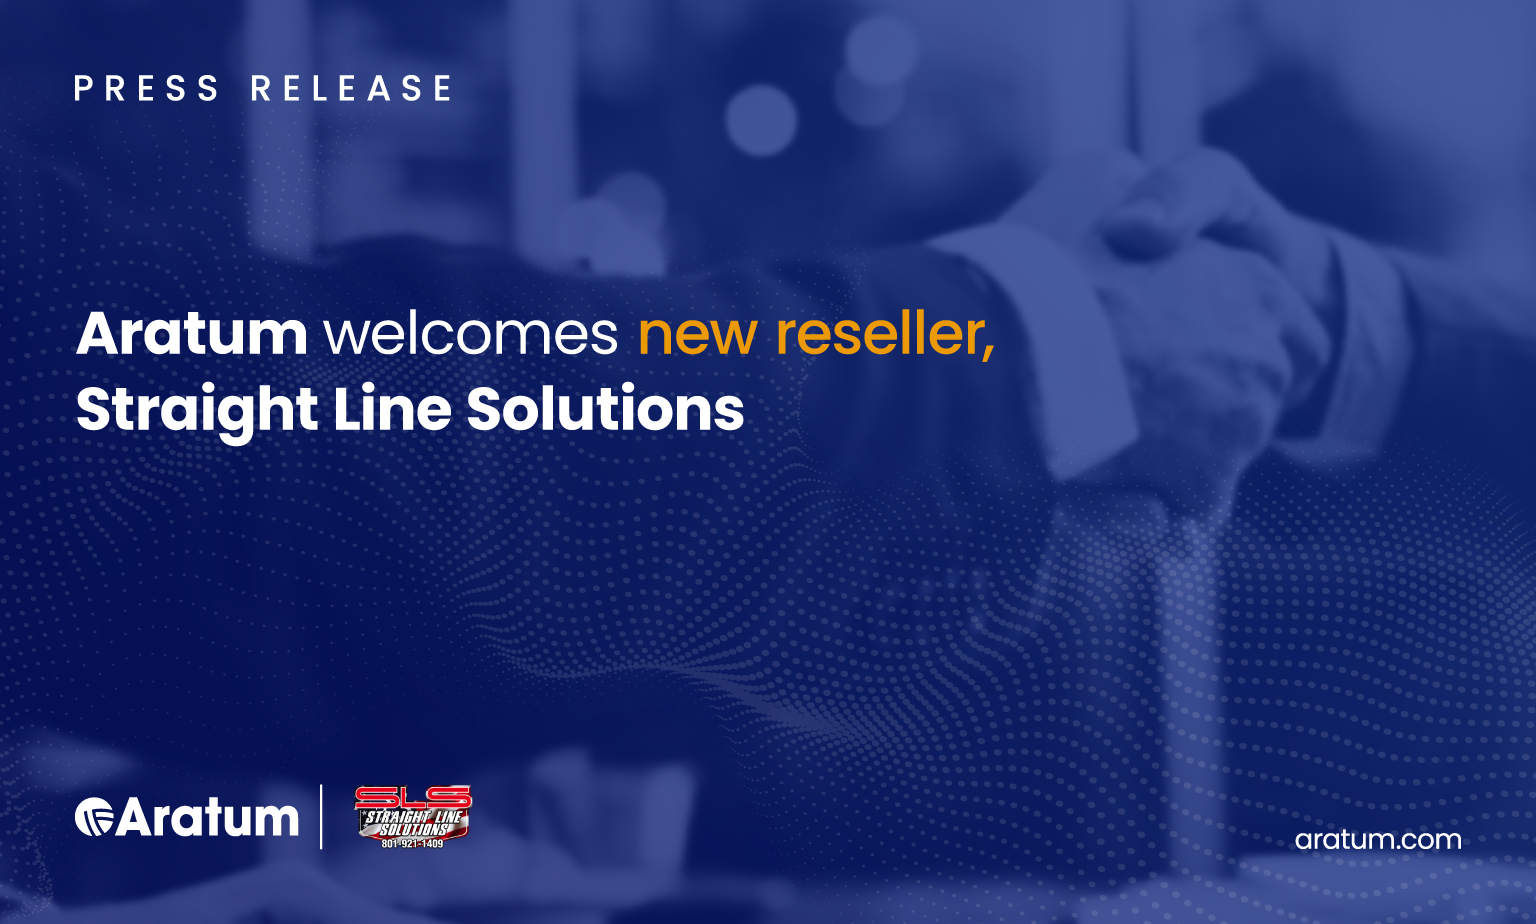 Aratum Welcomes New Reseller, Straight Line Solutions